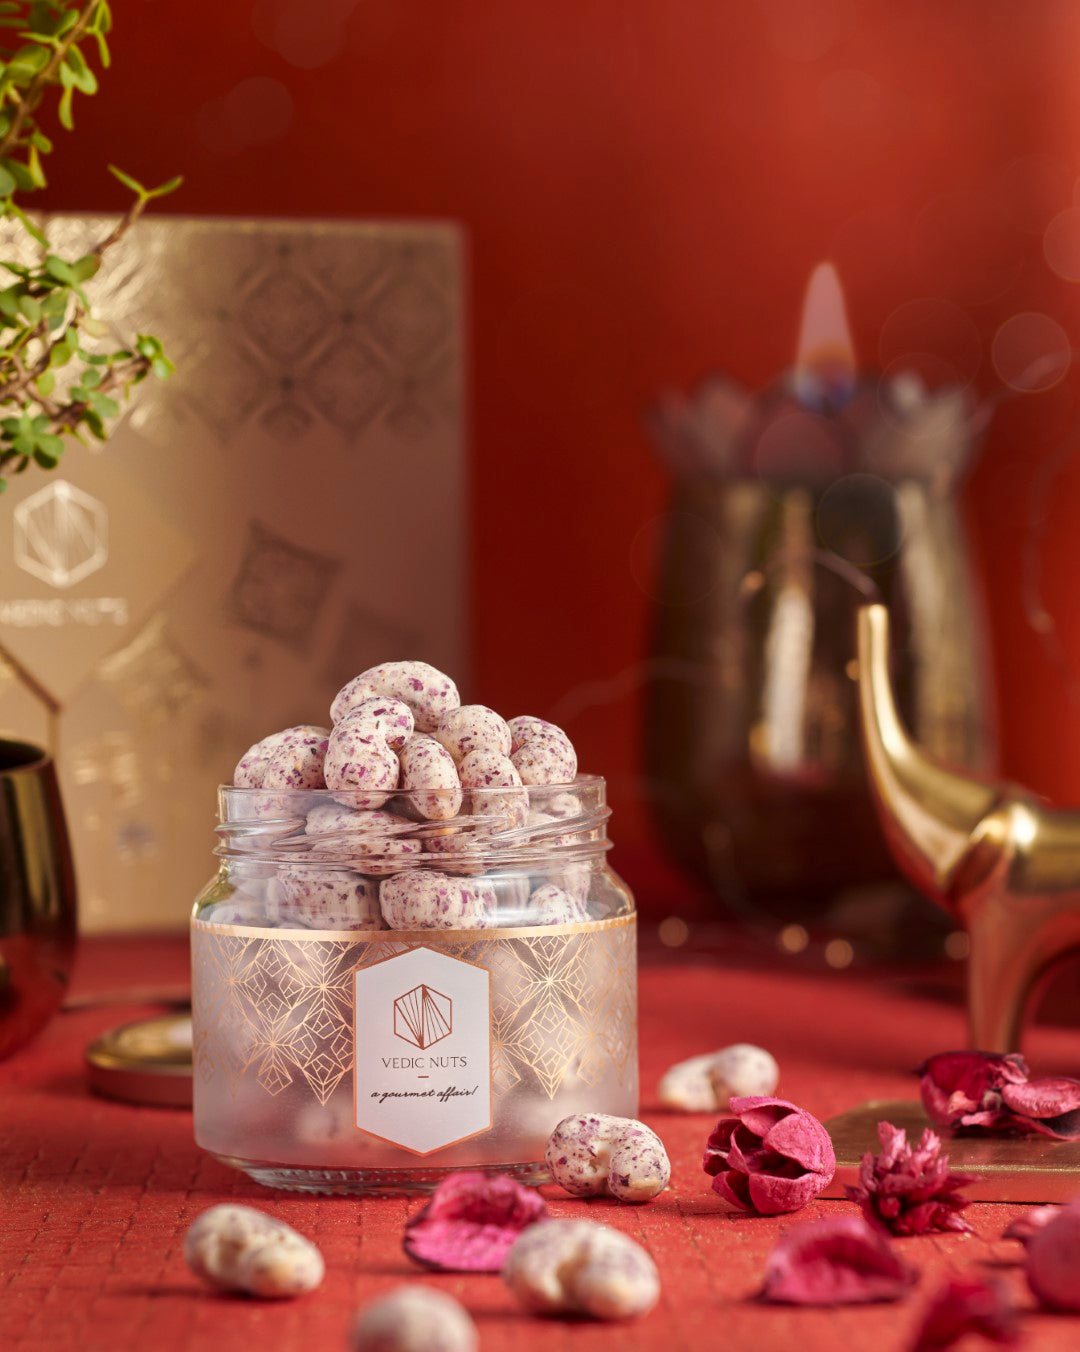 The Floral Collection (Set of 2 jars: 200gms each + Cookies)